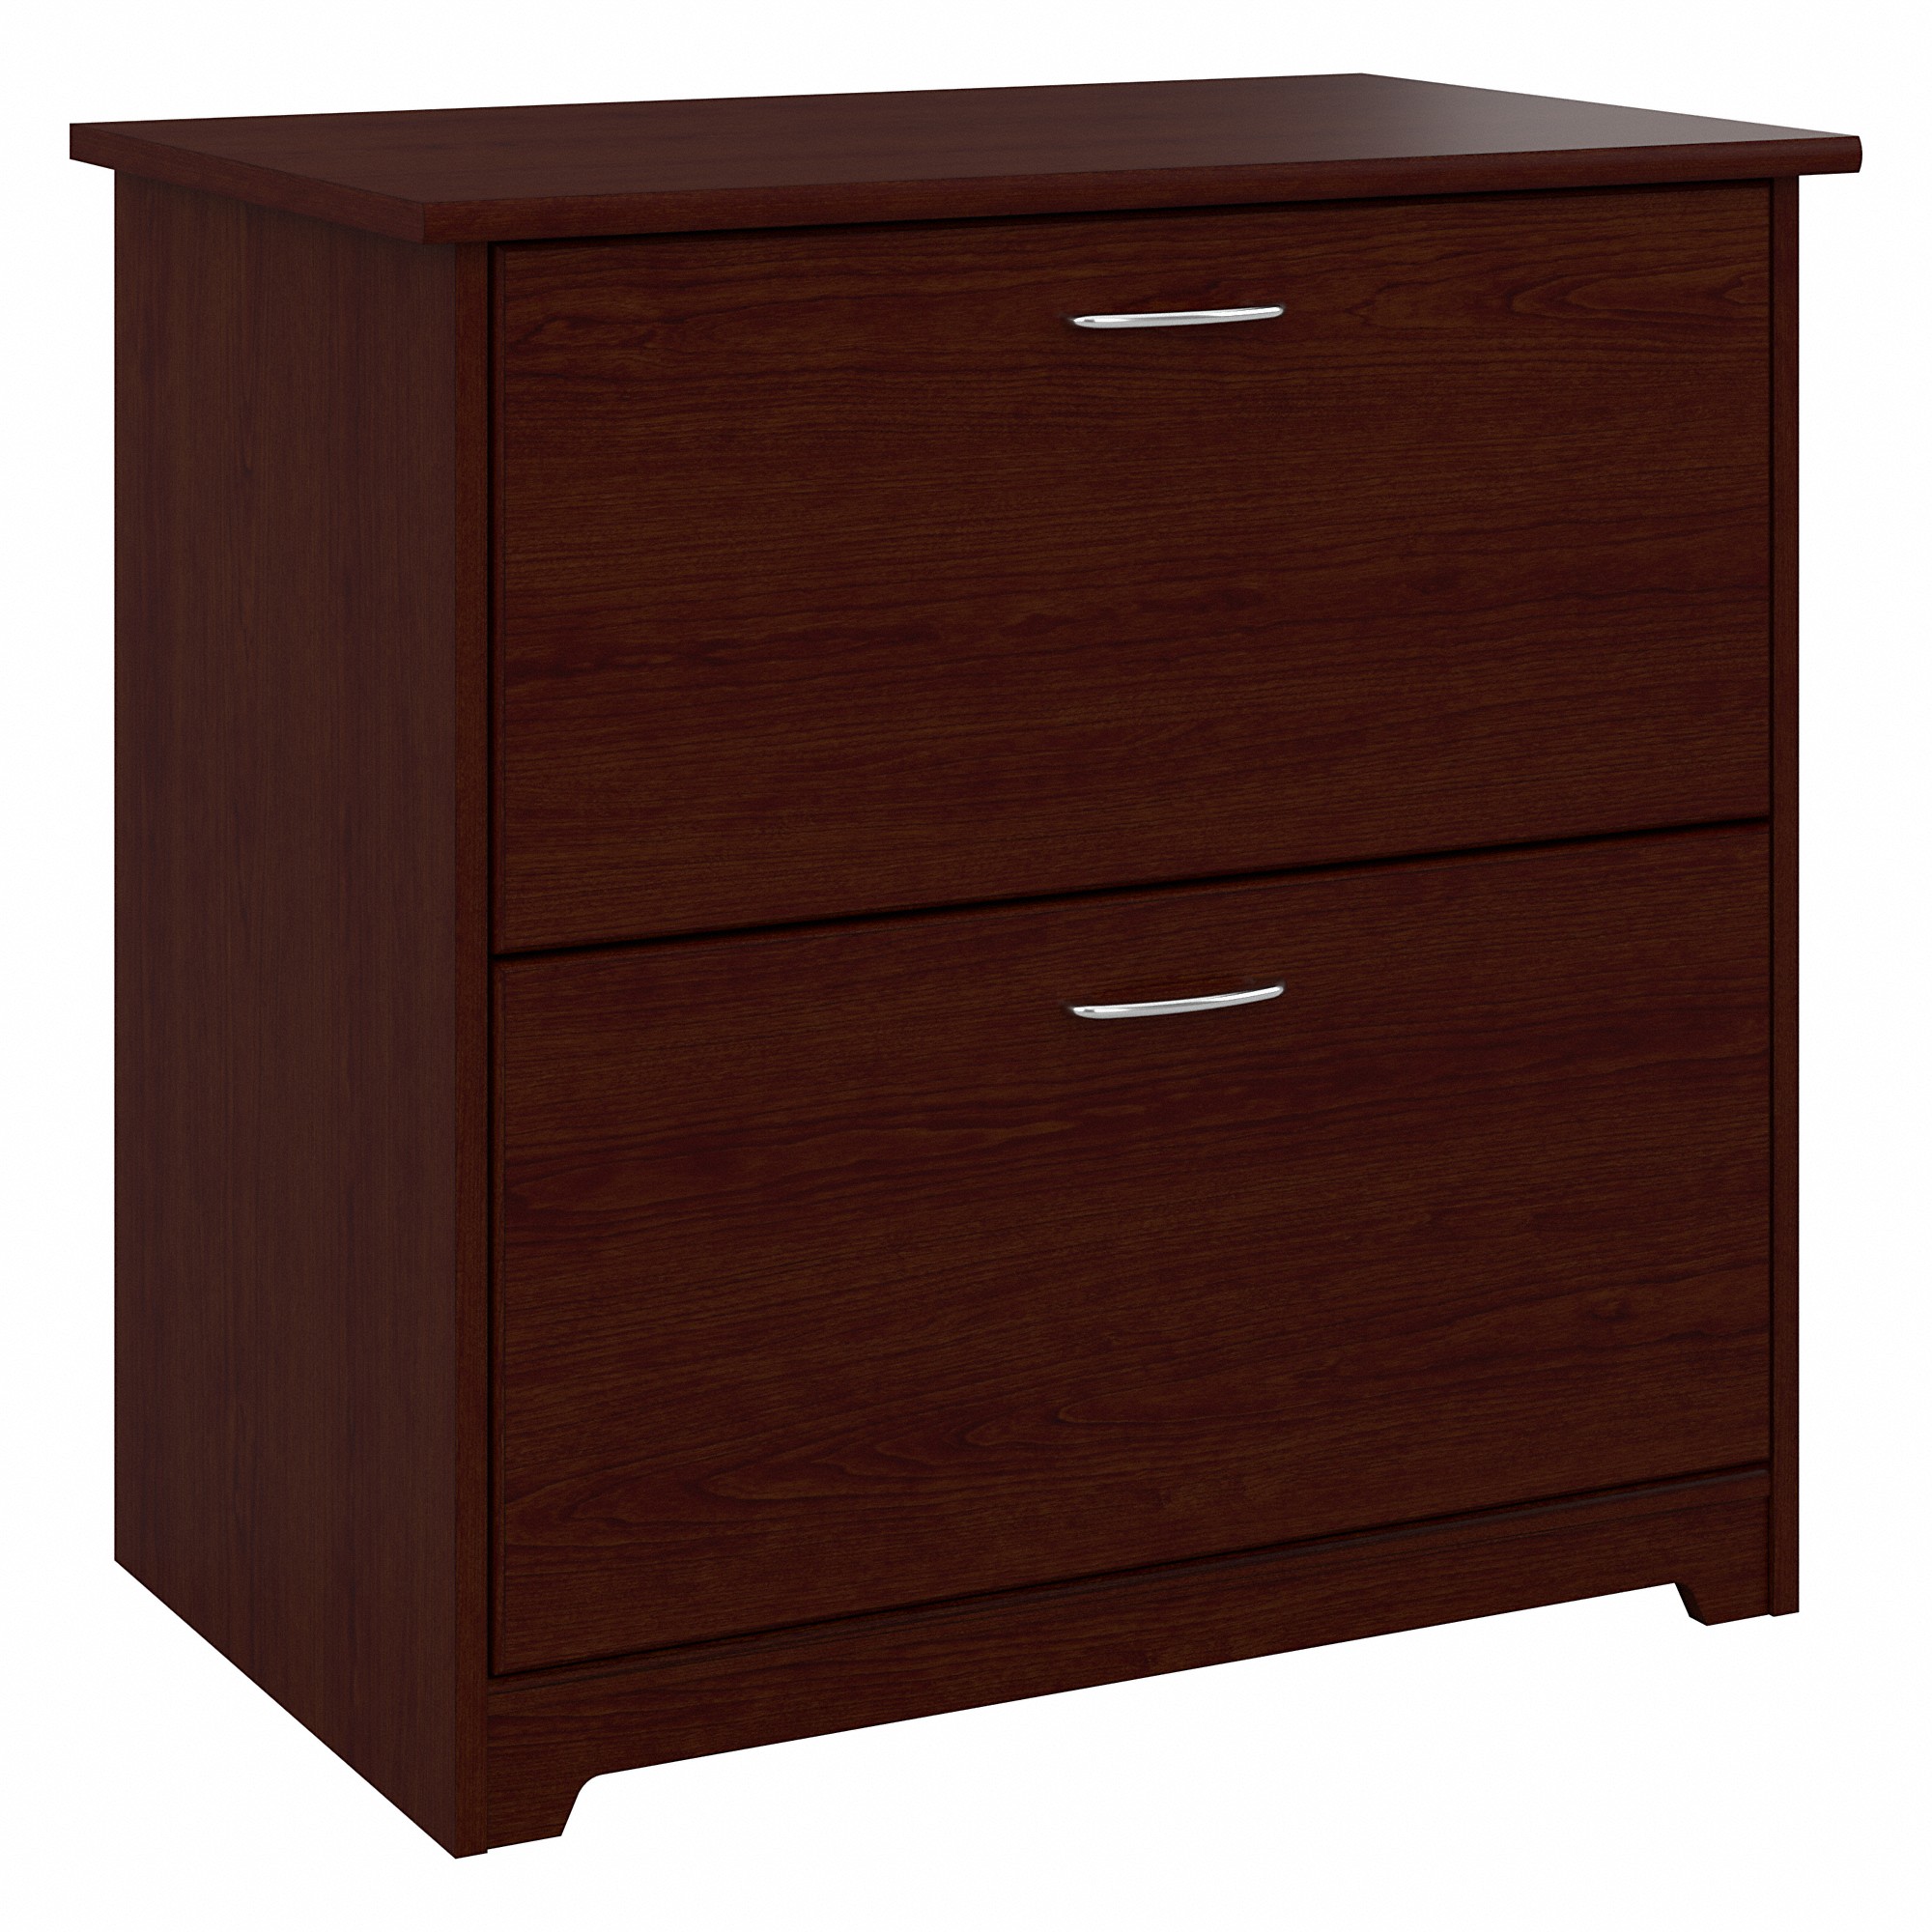 Bush Furniture Cabot Lateral File Cabinet, 2 Drawer, Harvest Cherry - image 1 of 9